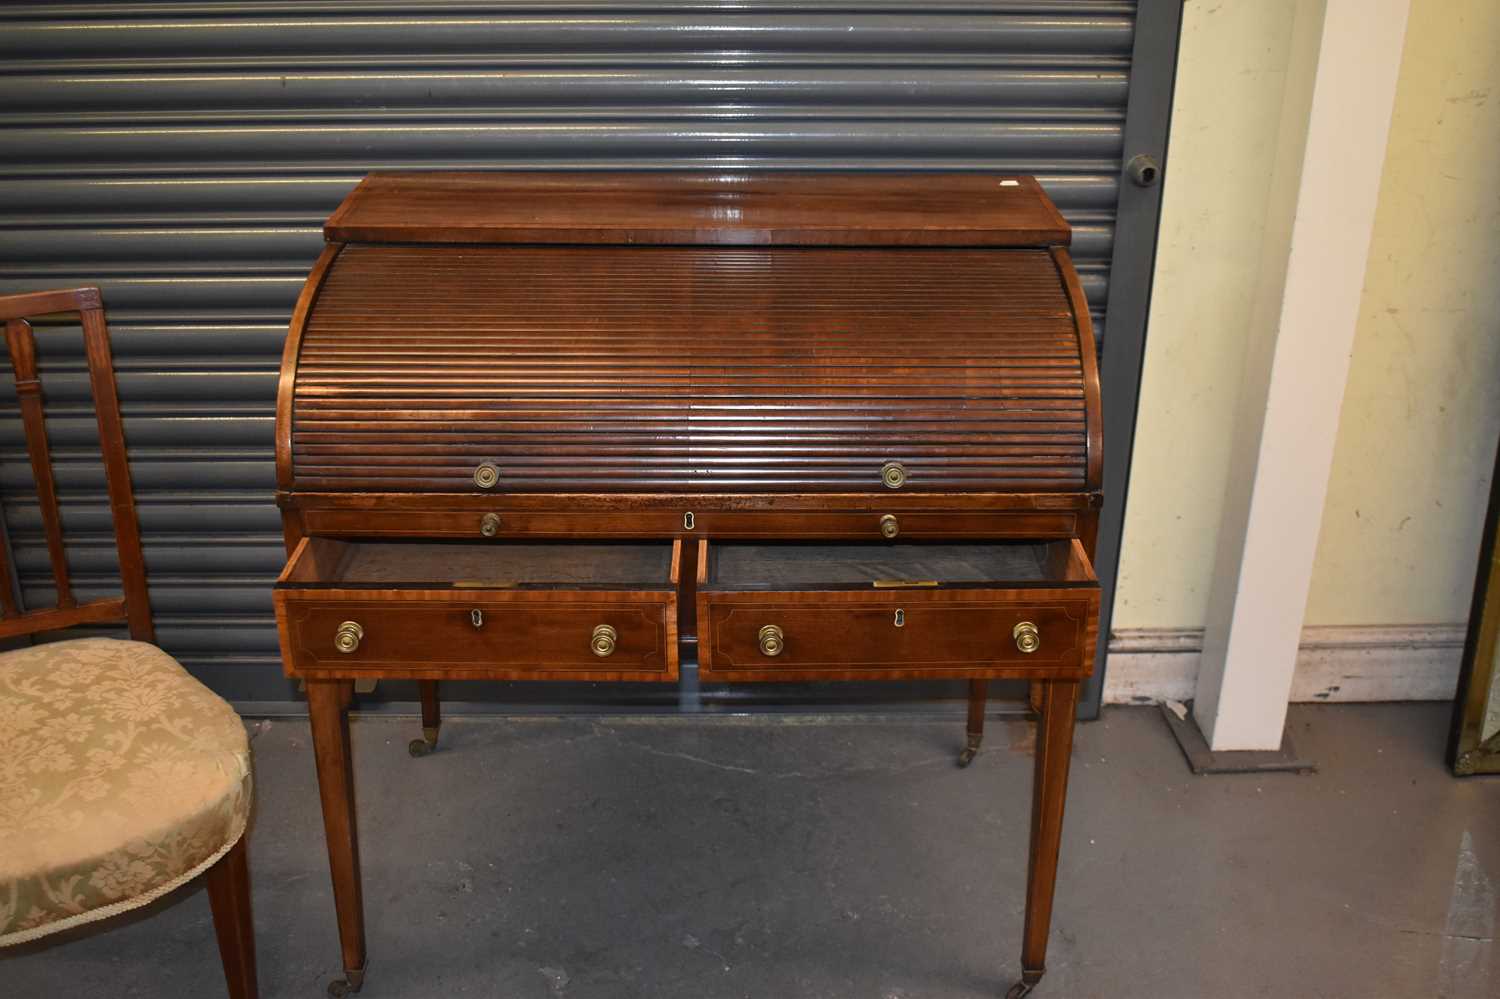 H MAWER & STEPHENSON, LONDON; an early 19th century mahogany writing table with satinwood - Image 2 of 4